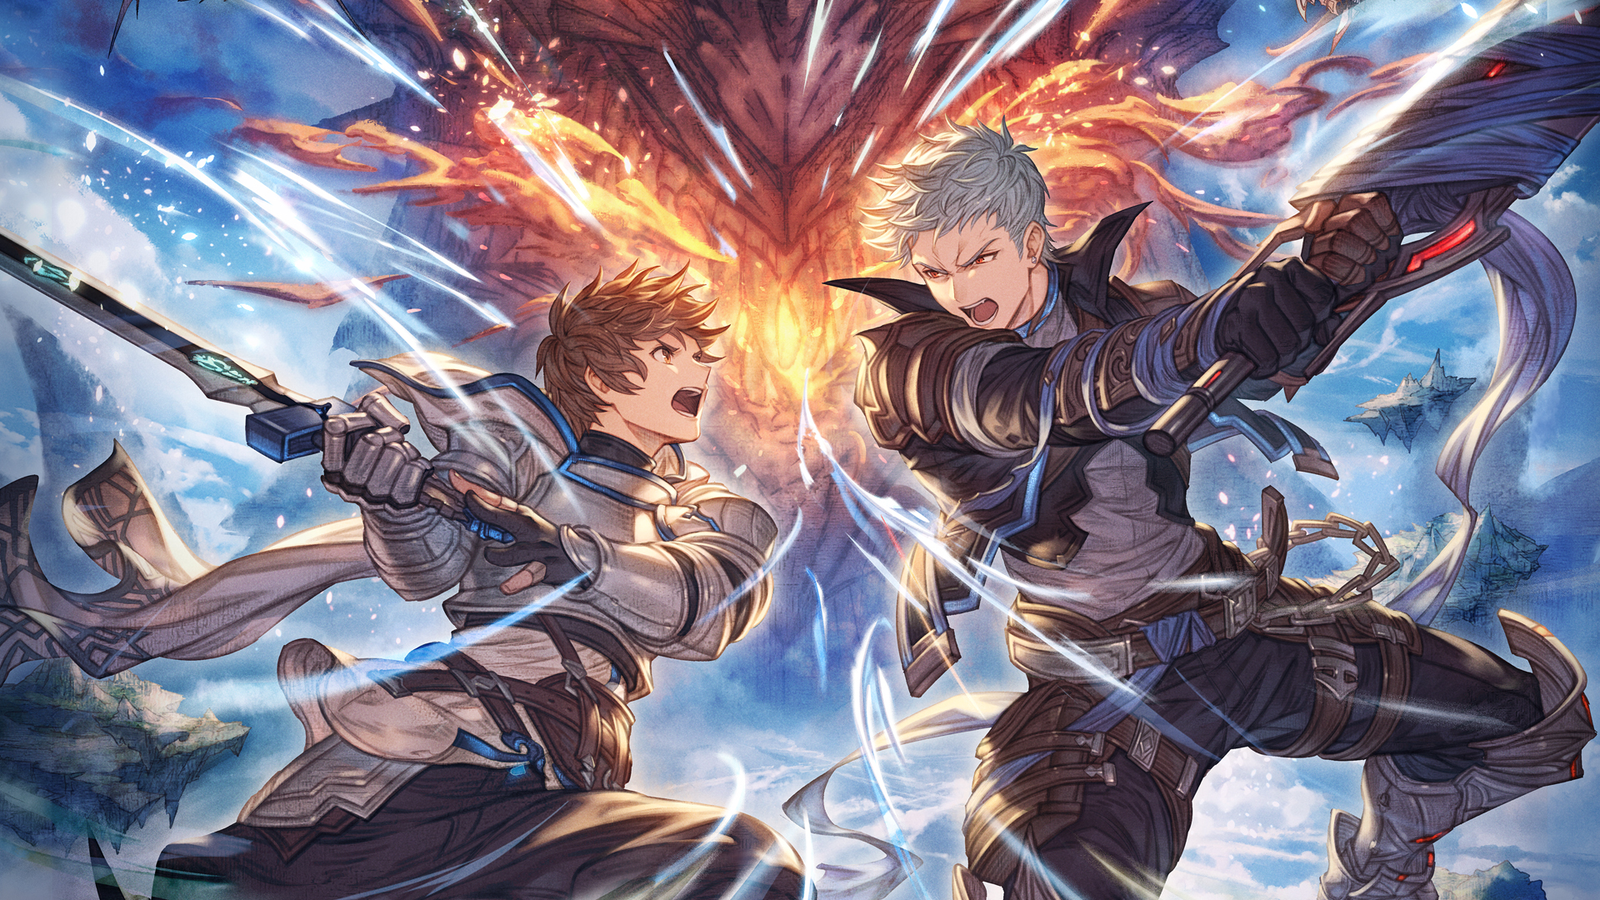 Granblue Fantasy: Relink sells 1 million copies in two weeks